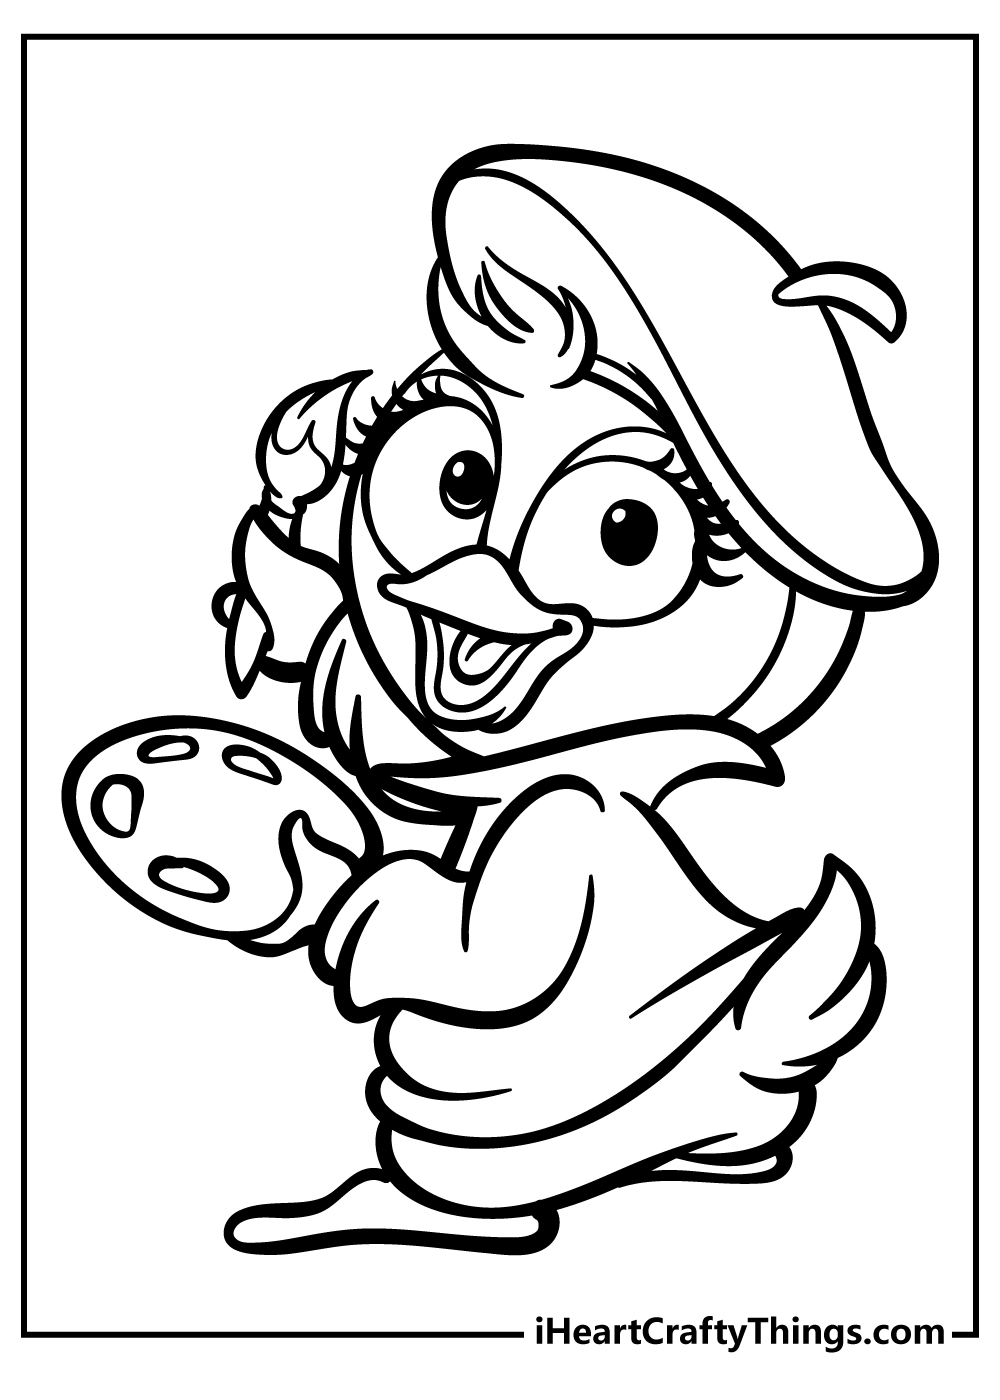 Muppet Babies Coloring Pages for adults free printable